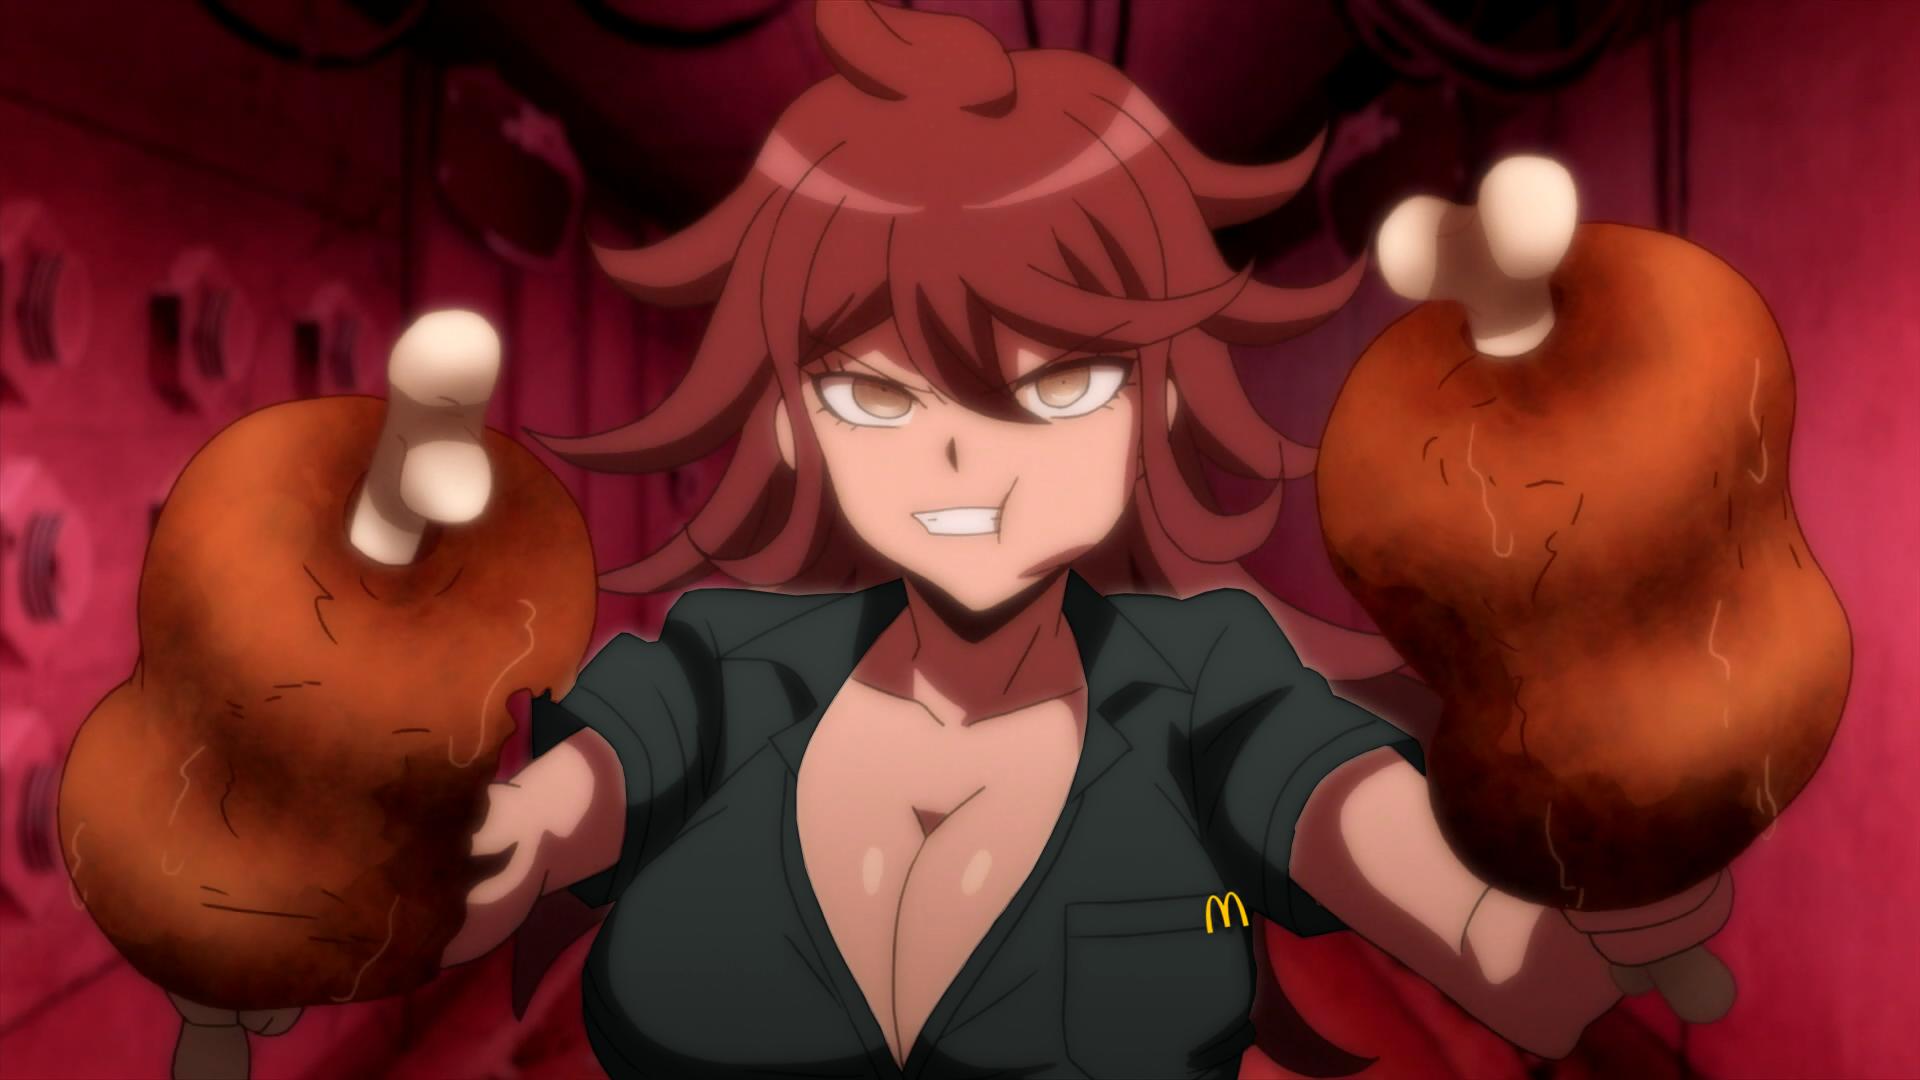 Maki Harukawa på Twitter: Come to McDonald's today, and be personally served Meat on the Bone by our very own Akane Owari! It's literally just meat on a bone. May contain meat